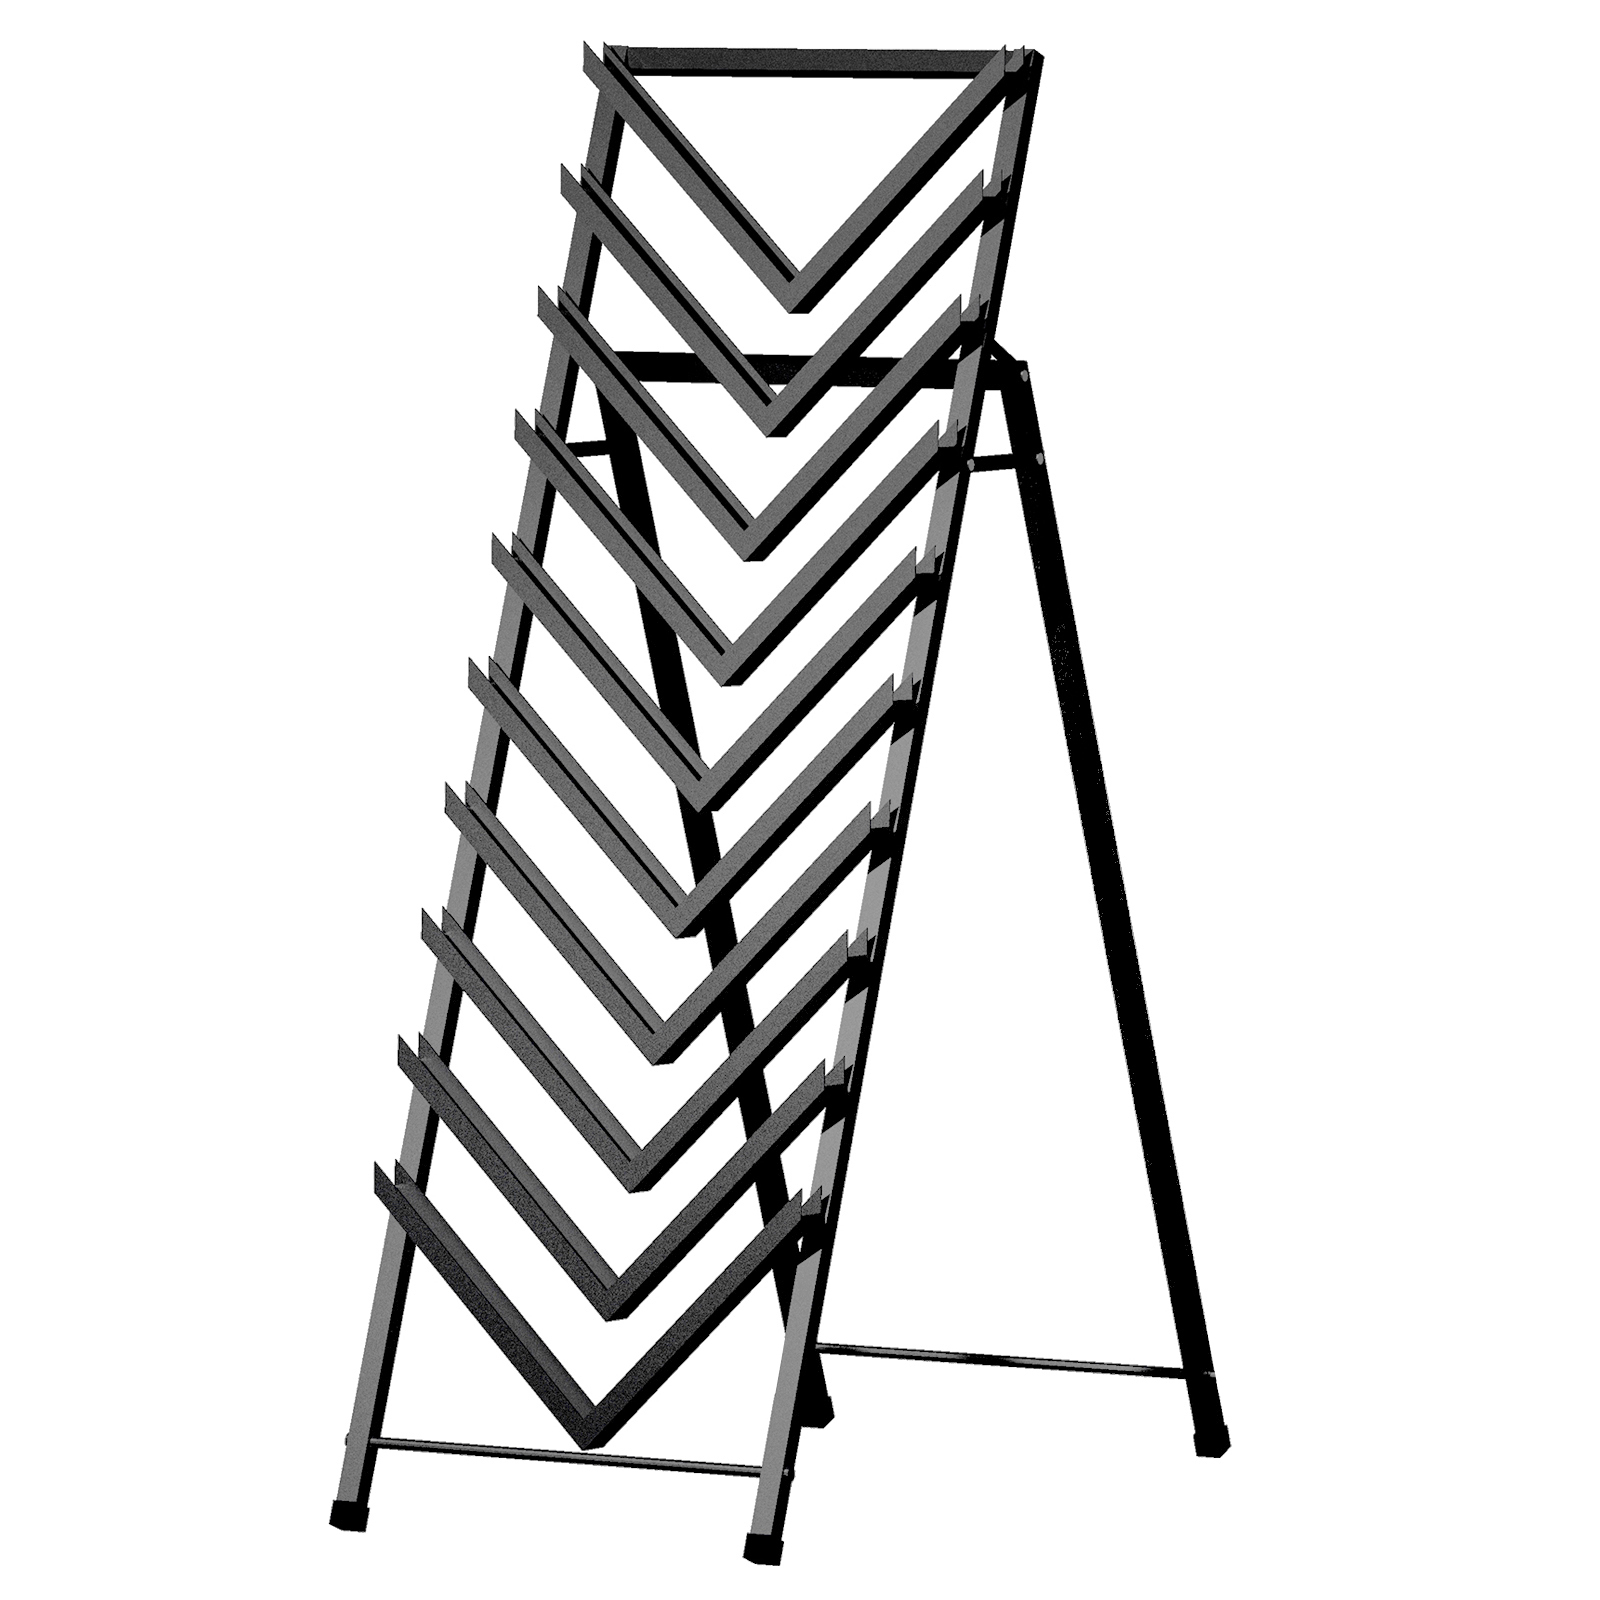 A10 Low Cost Tradeshow Easel A-Frame Ceramic Tile Stone Marble Showroom Displays McColl Display